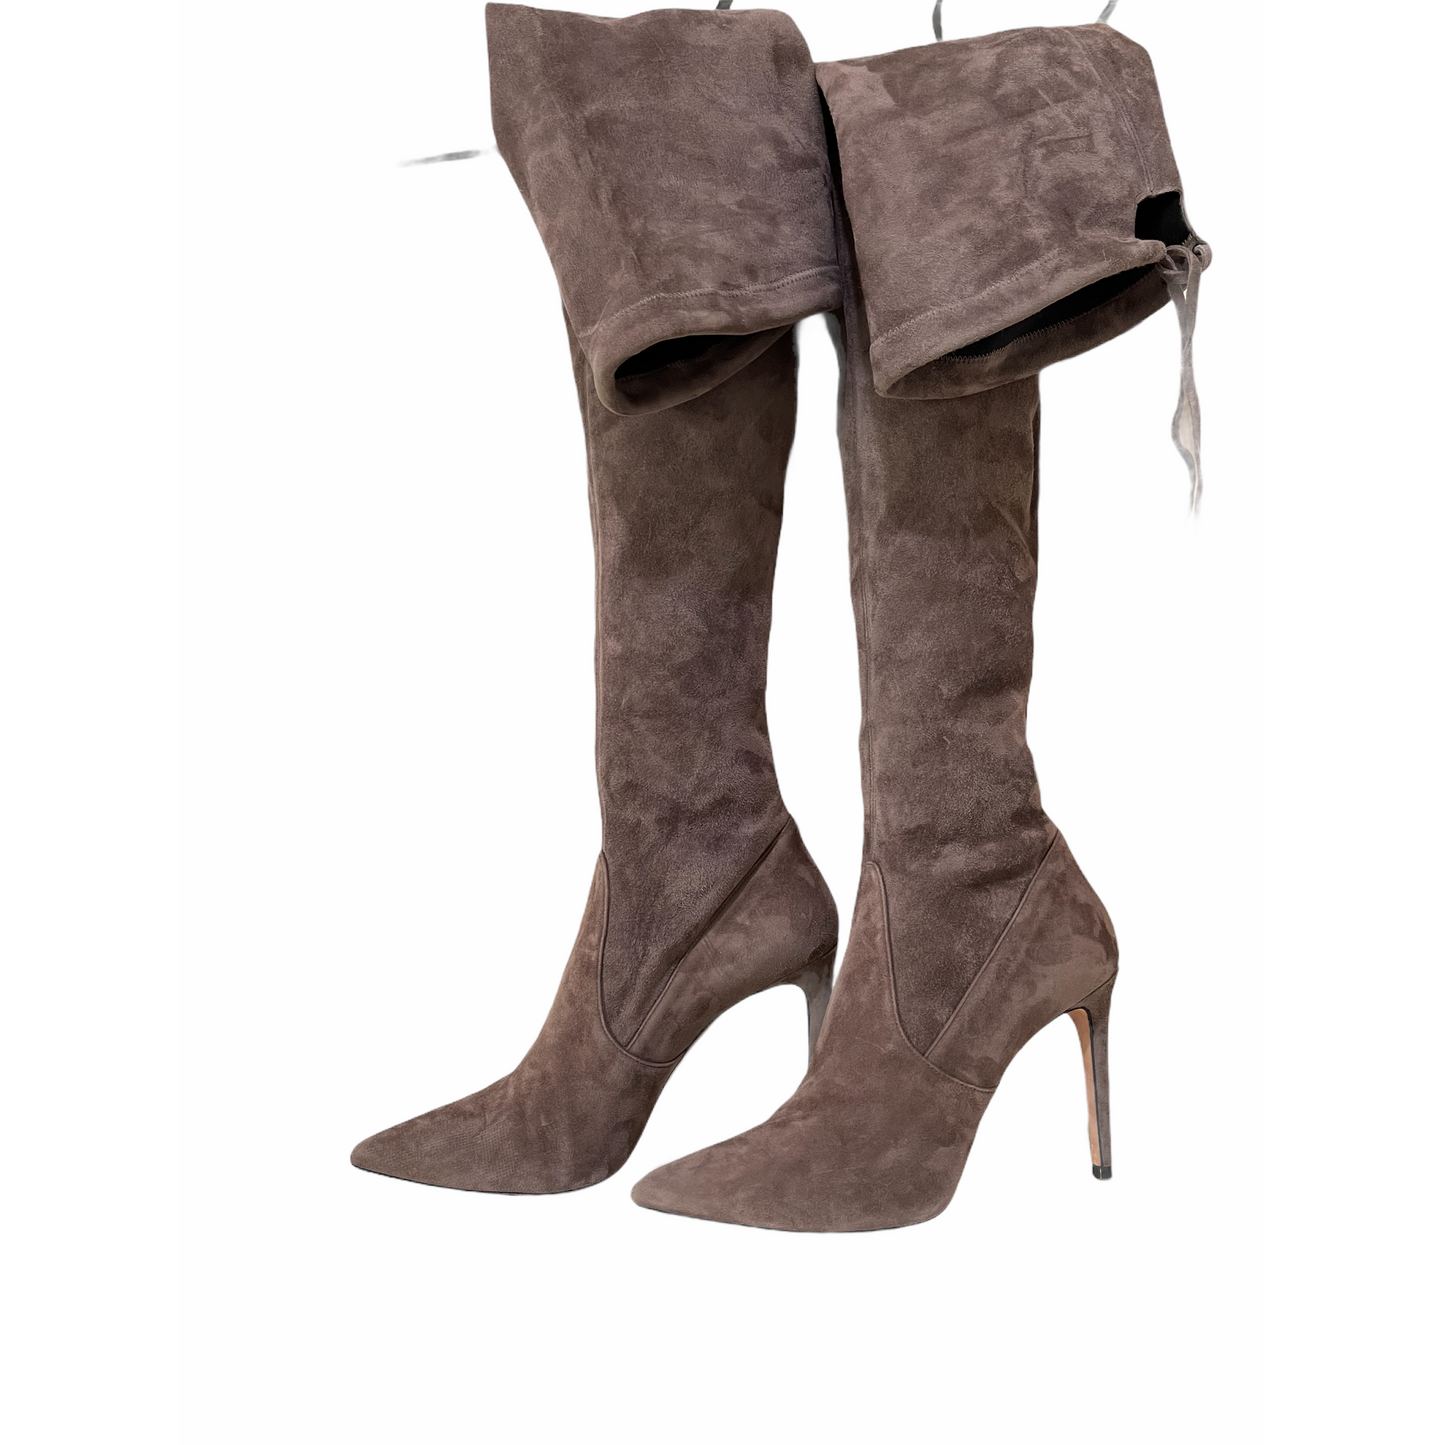 Heeled Boots-Over the Knee Style-Suede Material By Vero Cuoio